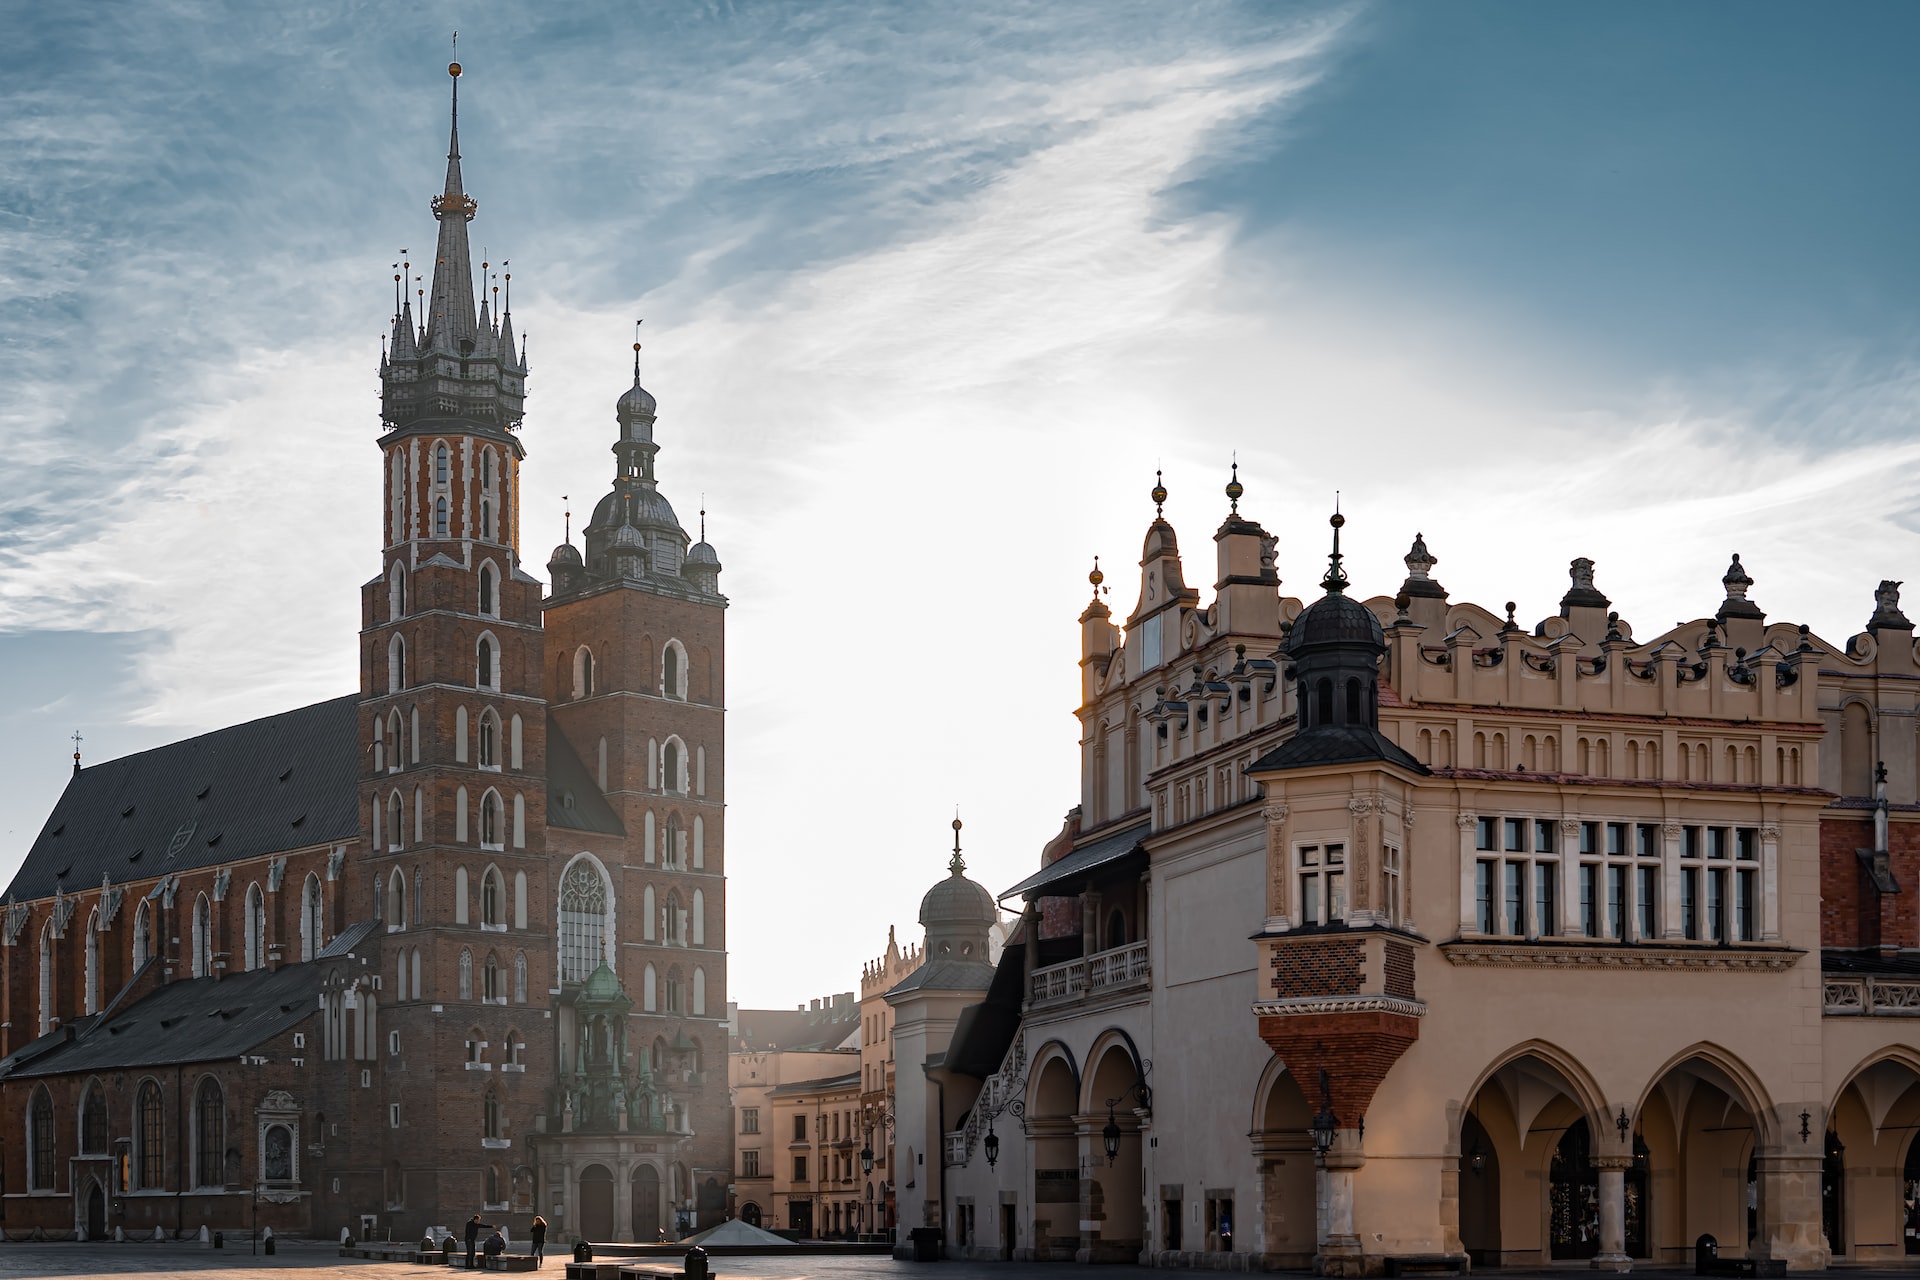 Krakow, Poland is one of the best places to visit in Eastern Europe